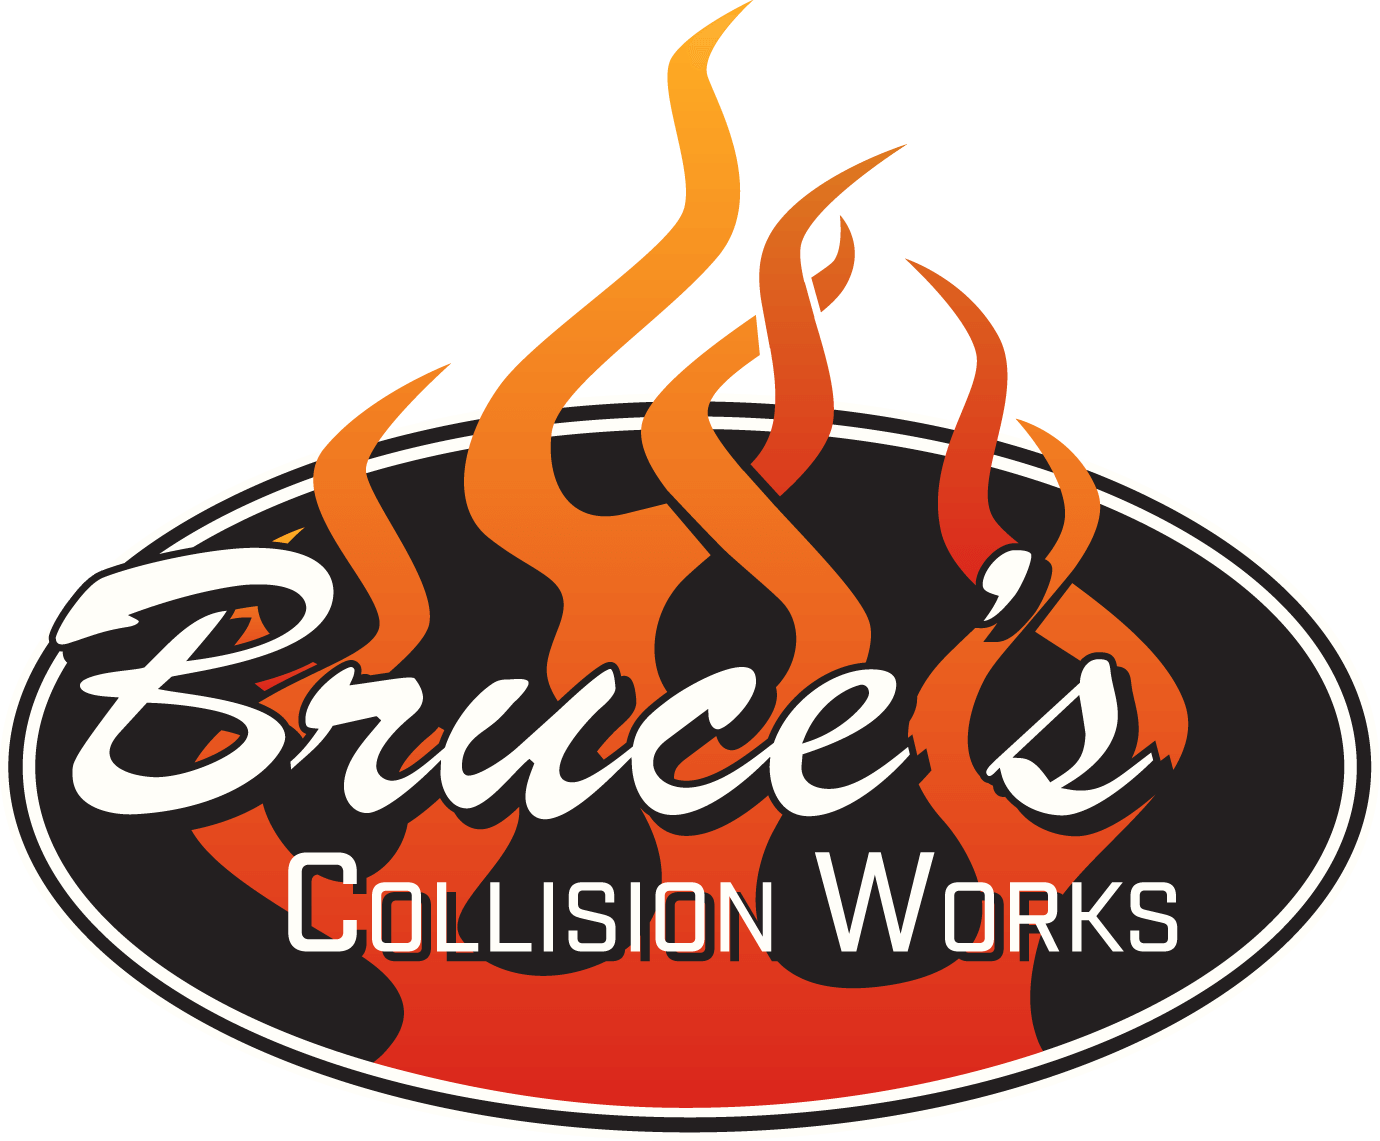 Bruce's Collision Works